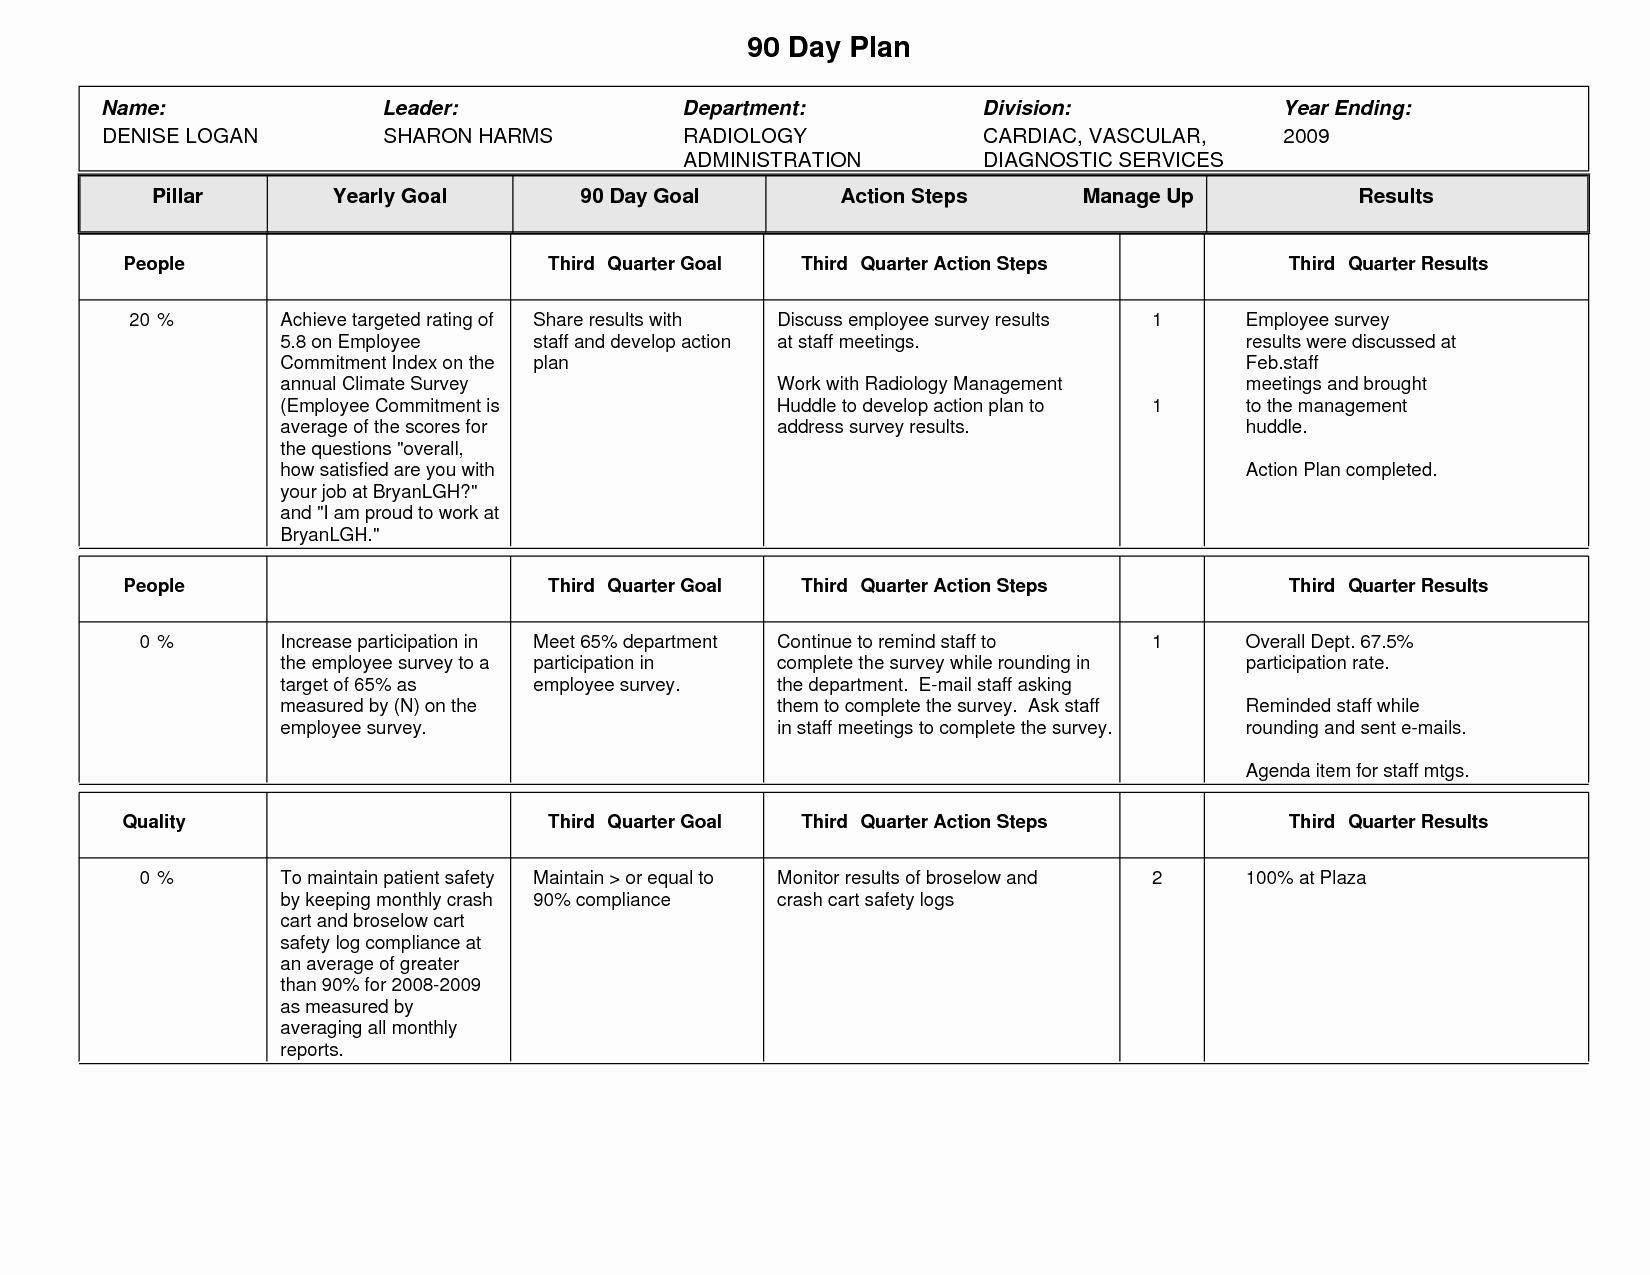 90 Day Action Plan Templates Luxury Best S Of 90 Day Transition Plan Template Sample 90